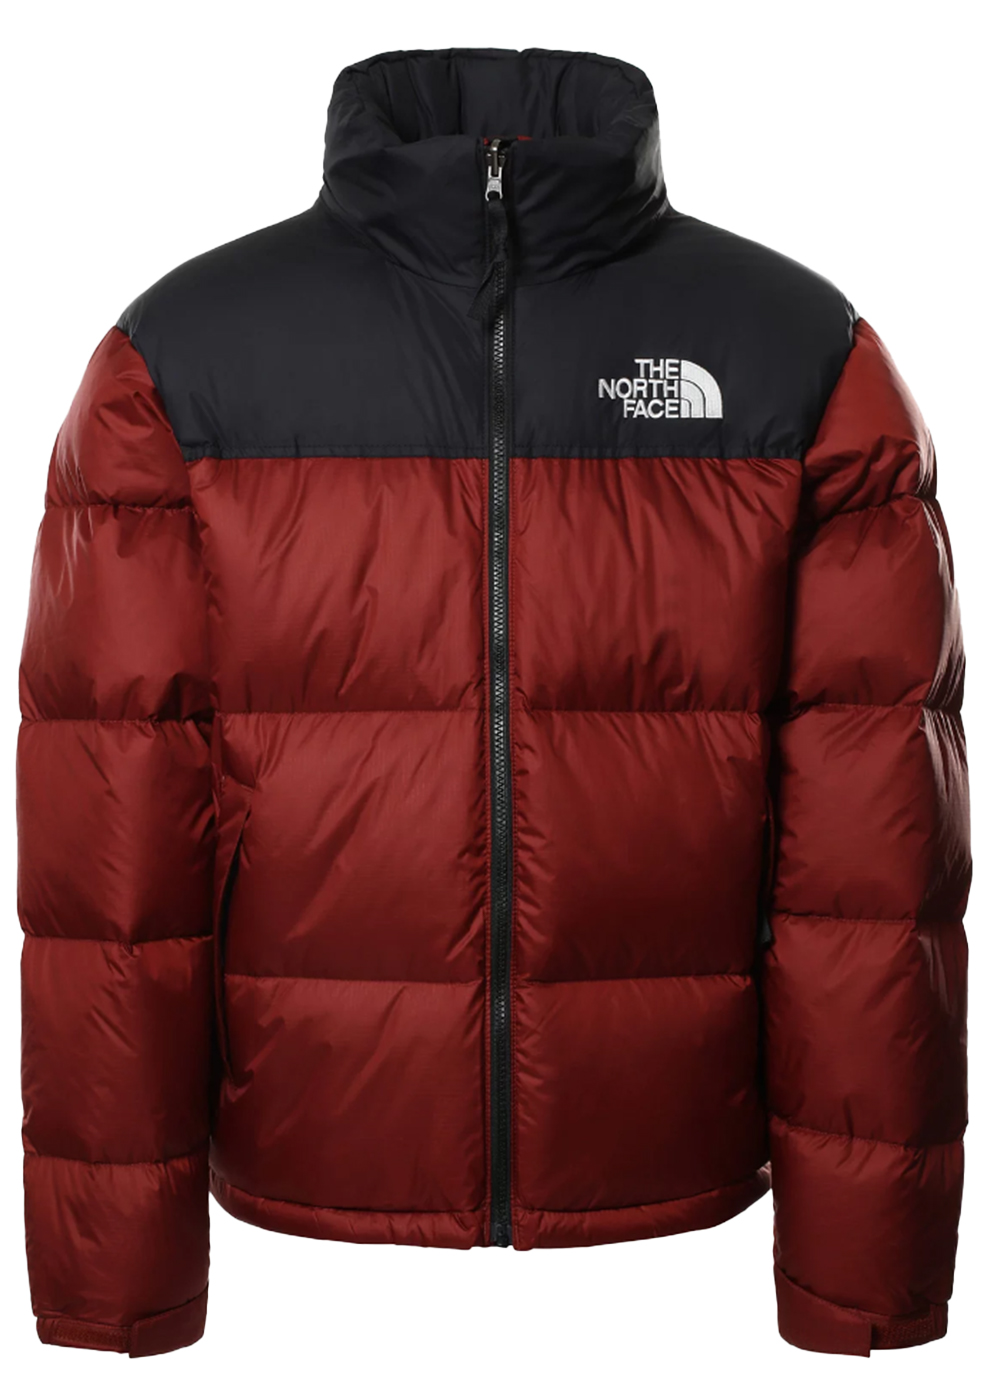 Other Brands The North Face - apparel